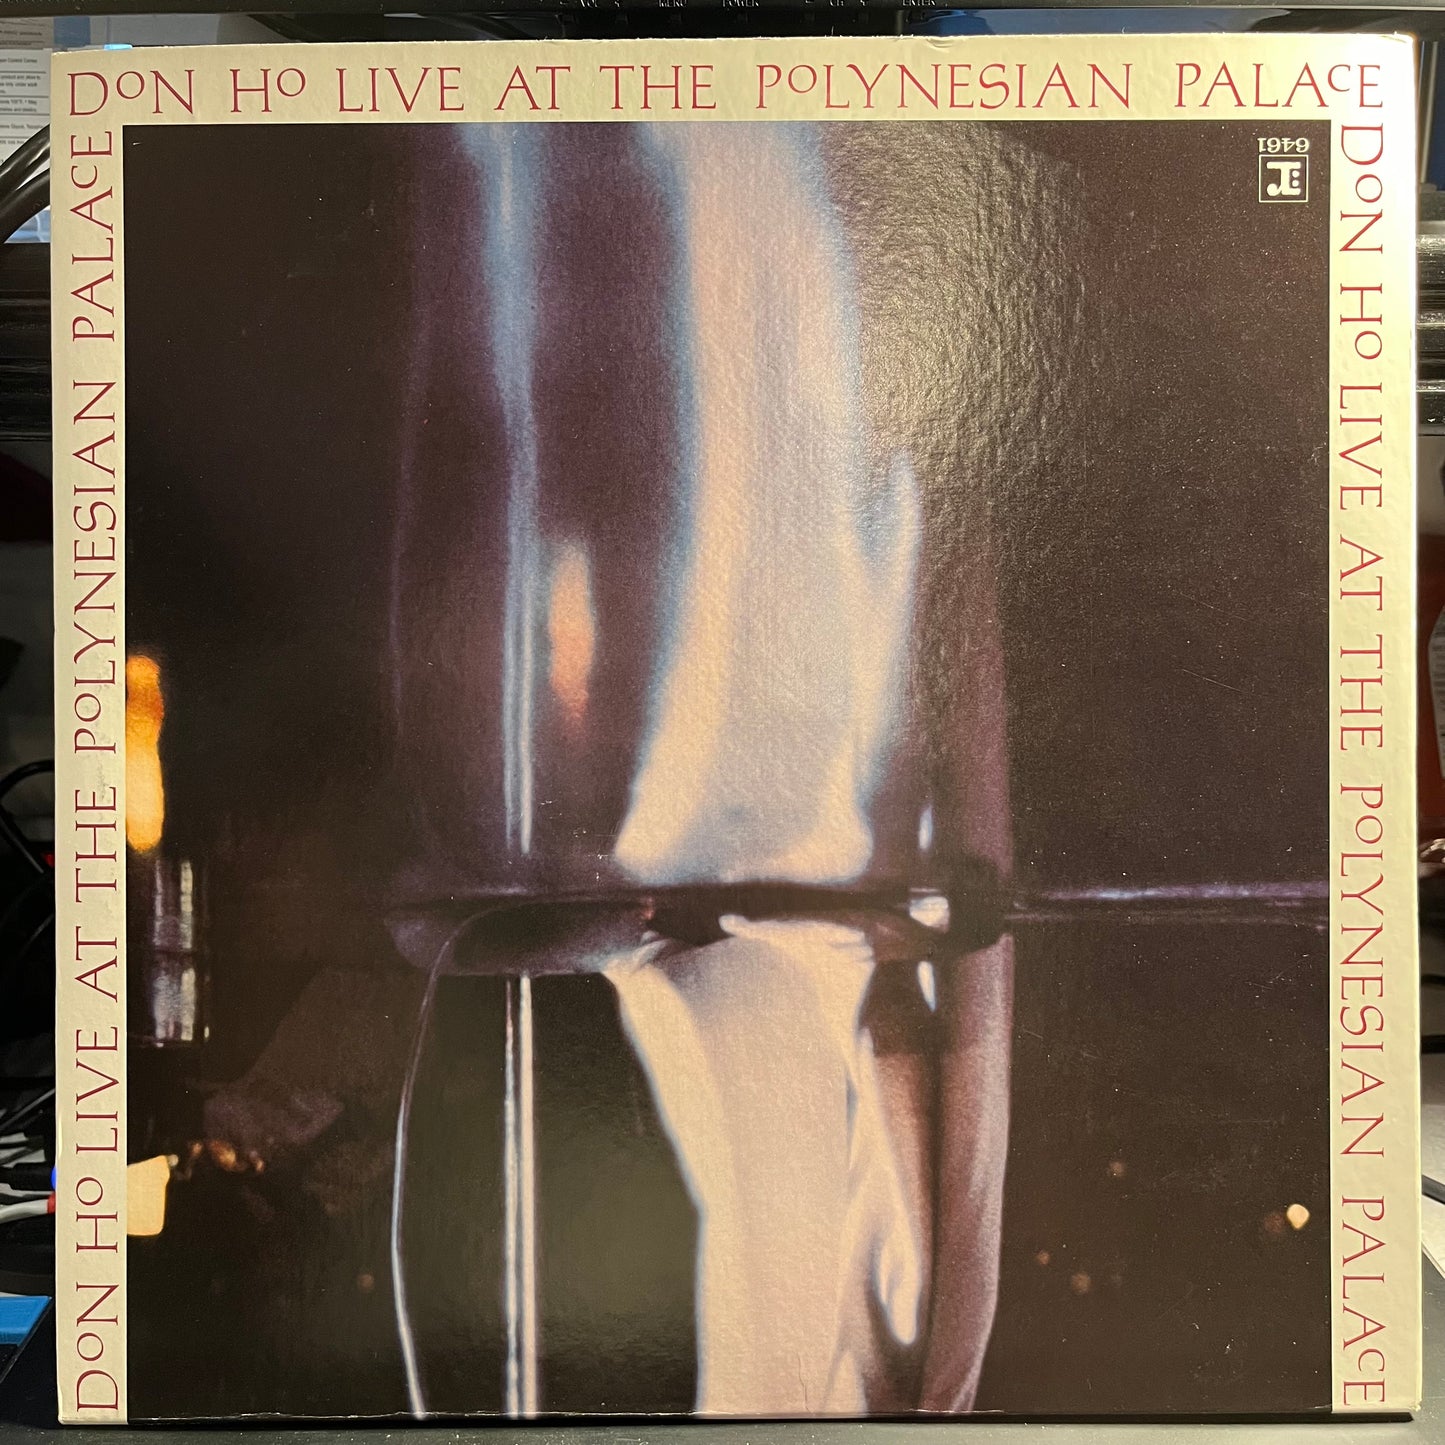 Don Ho Live At The Polynesian Palace *STEREO* LP Near Mint (NM or M-) Near Mint (NM or M-)